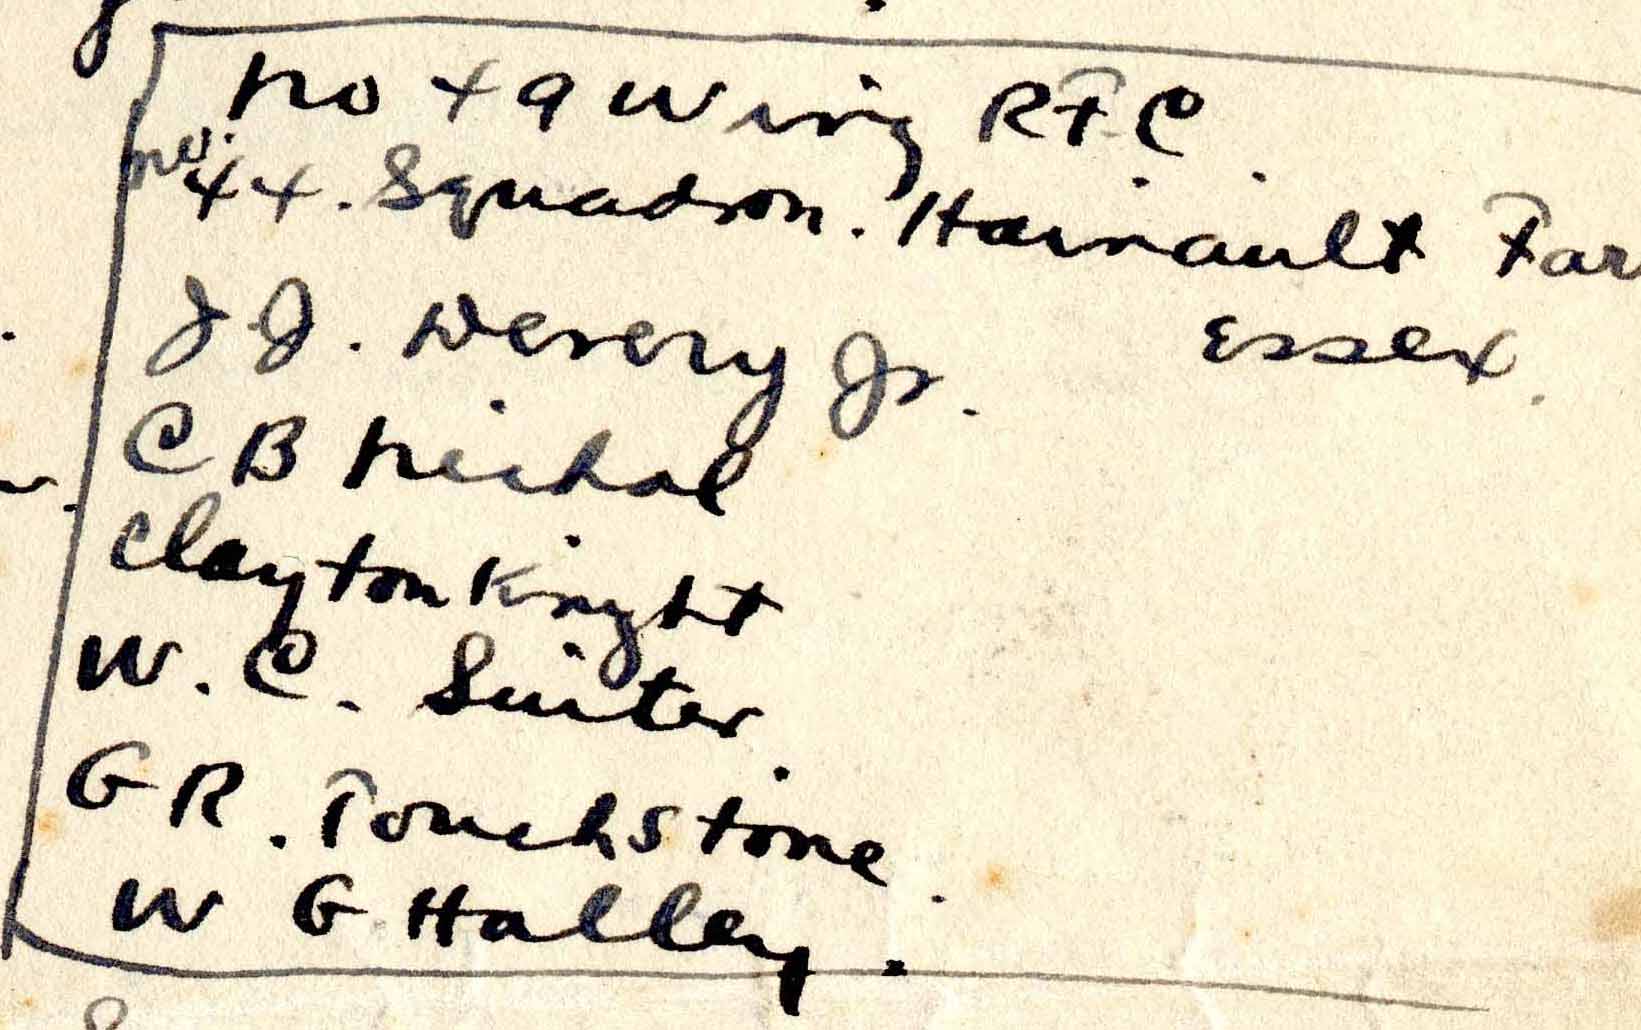 A handwritten list headed "No. 49 Wing RFC, No. 44 Squadron Hainault Farm Essex" followed by the names of six cadets.